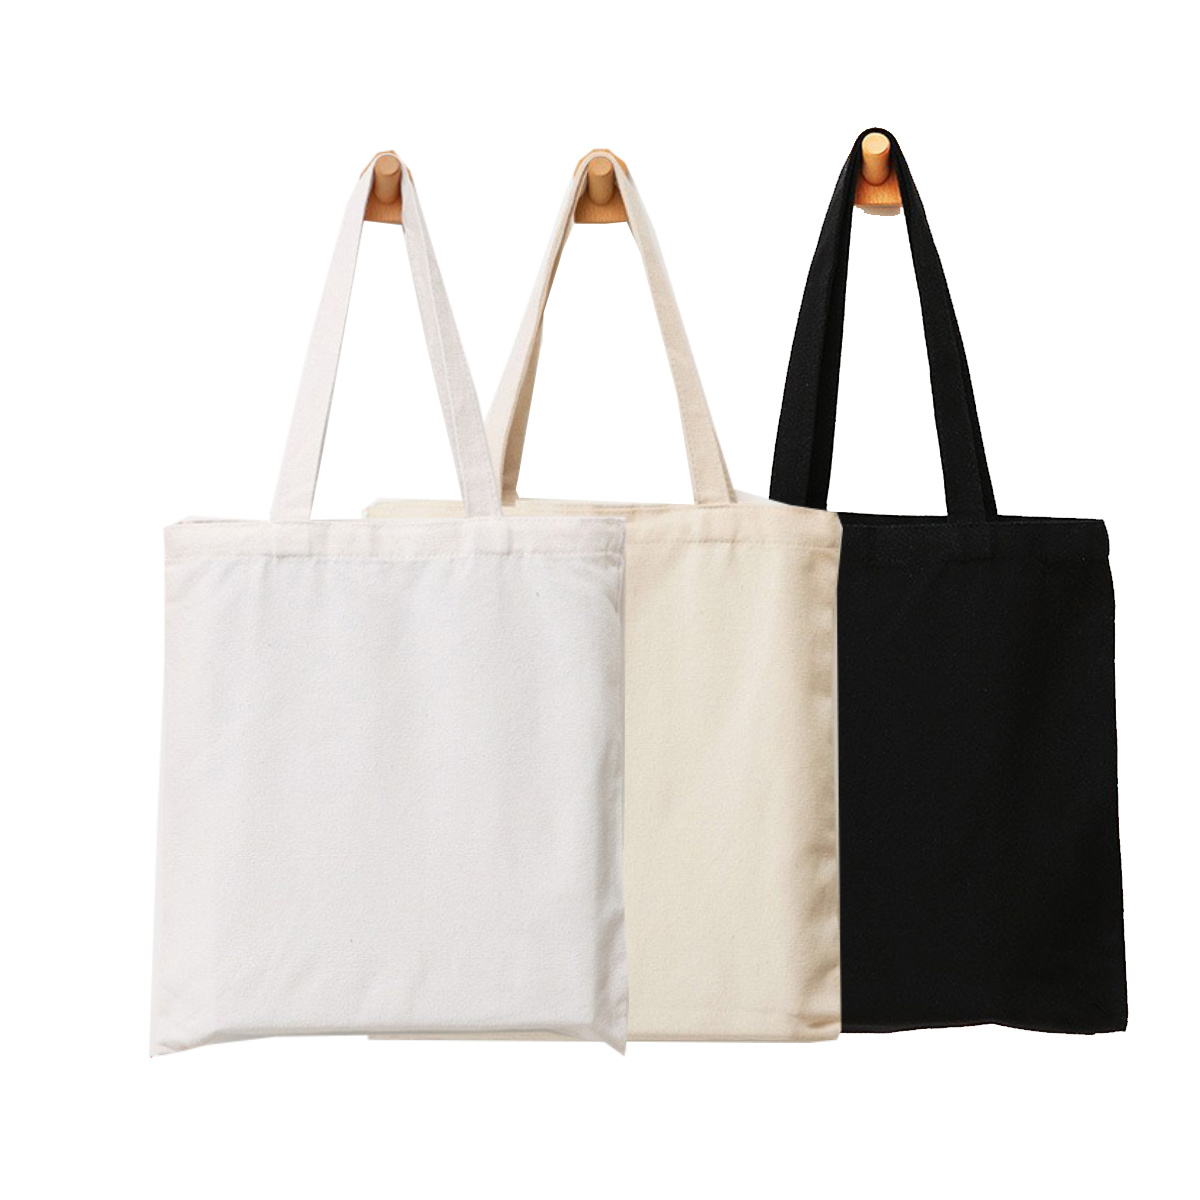 Reusable Canvas Tote Bag, Lightweight Grocery Shopping Bag, Gift